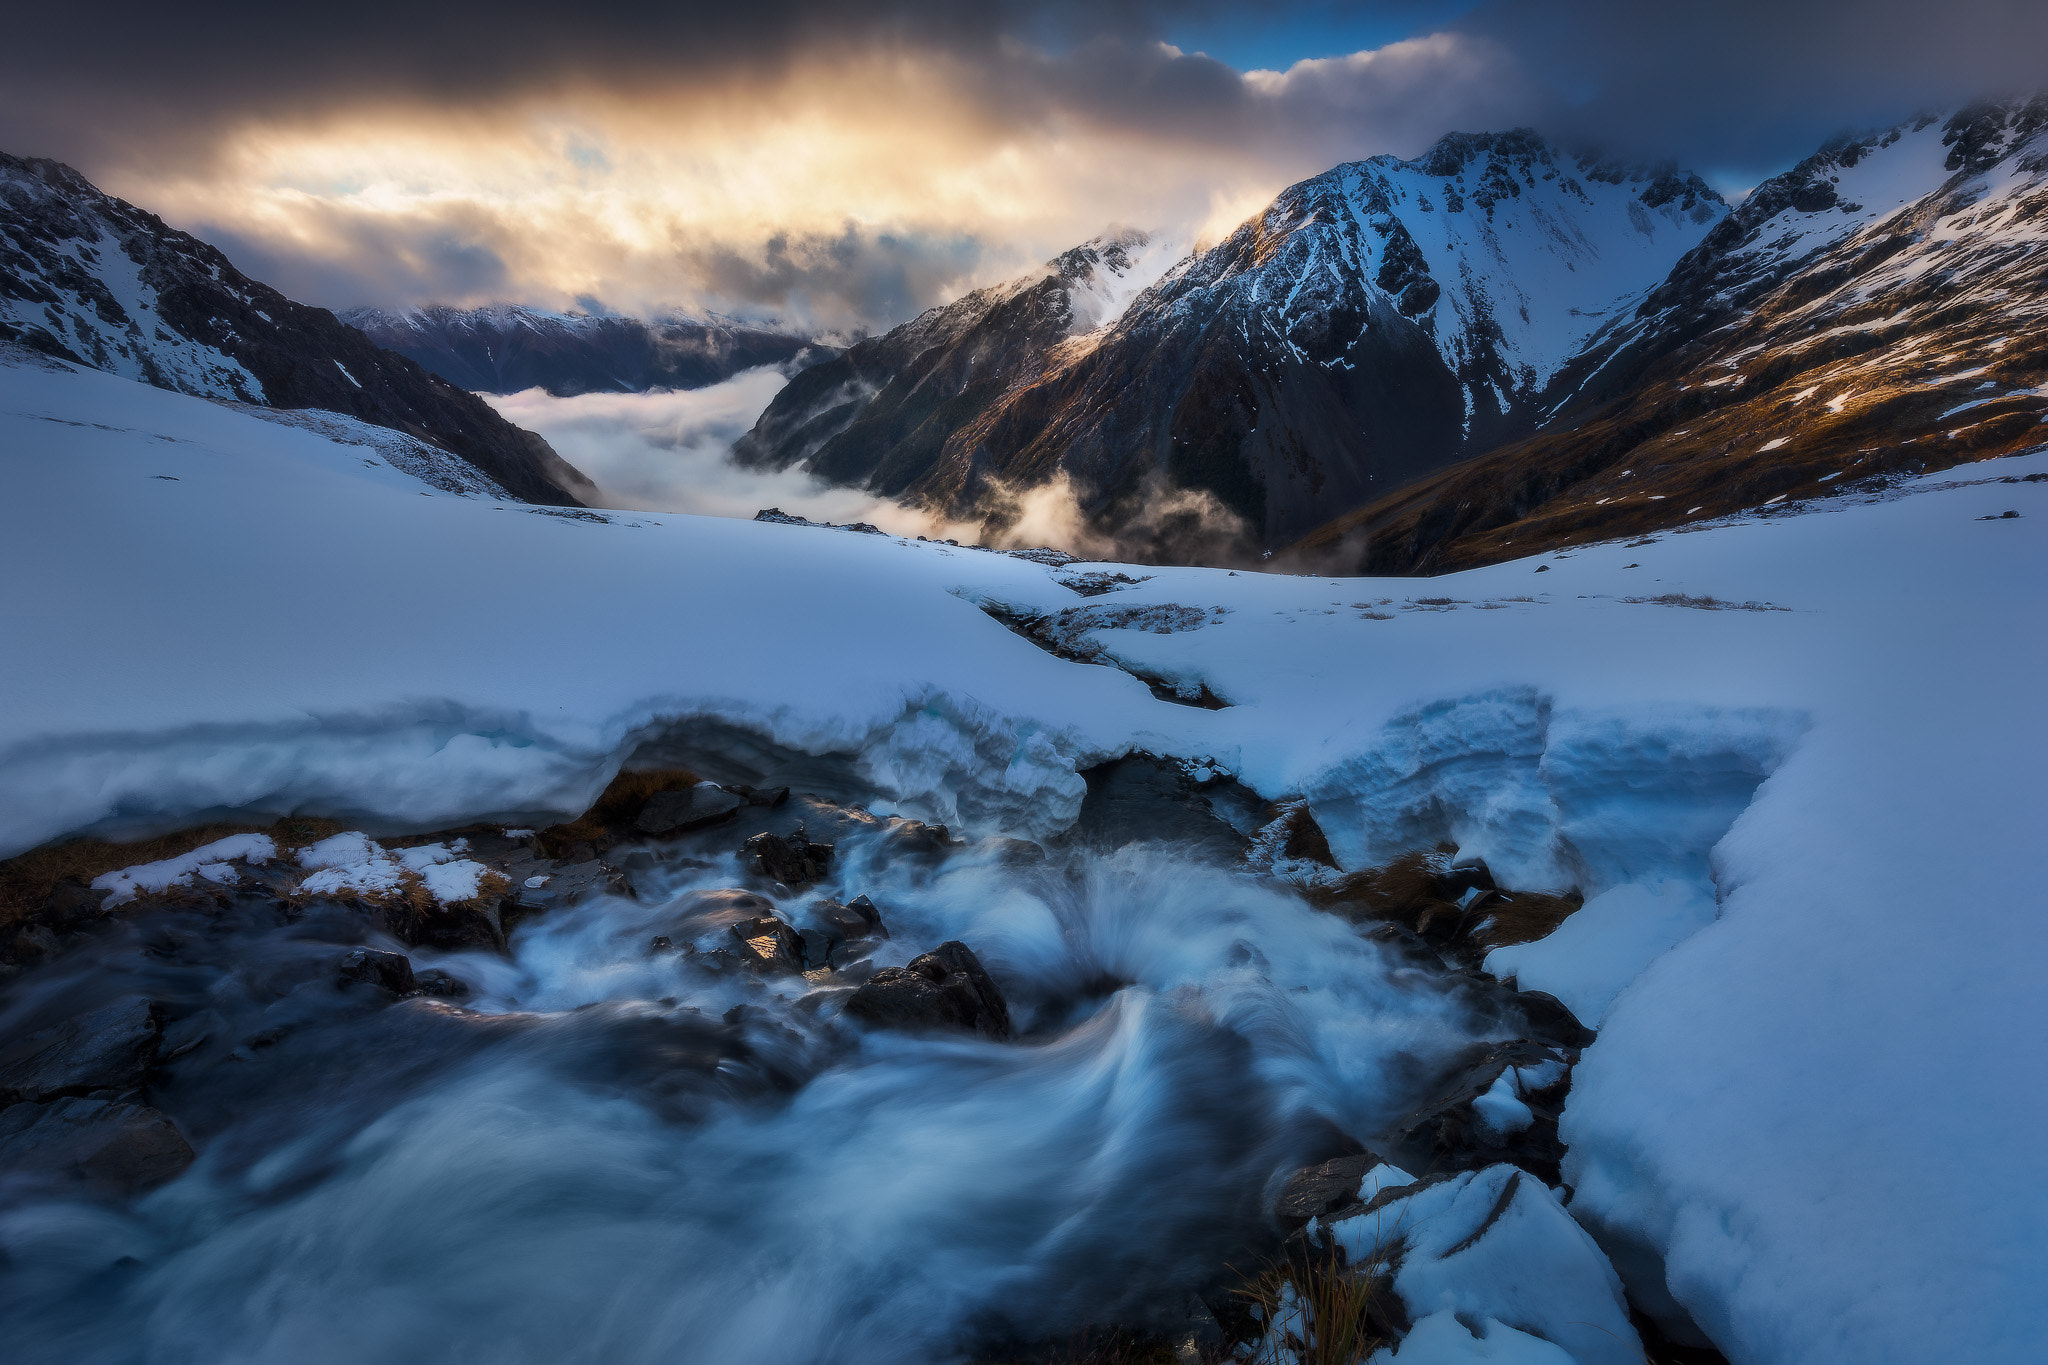 General 2048x1365 snow ice landscape nature mountains